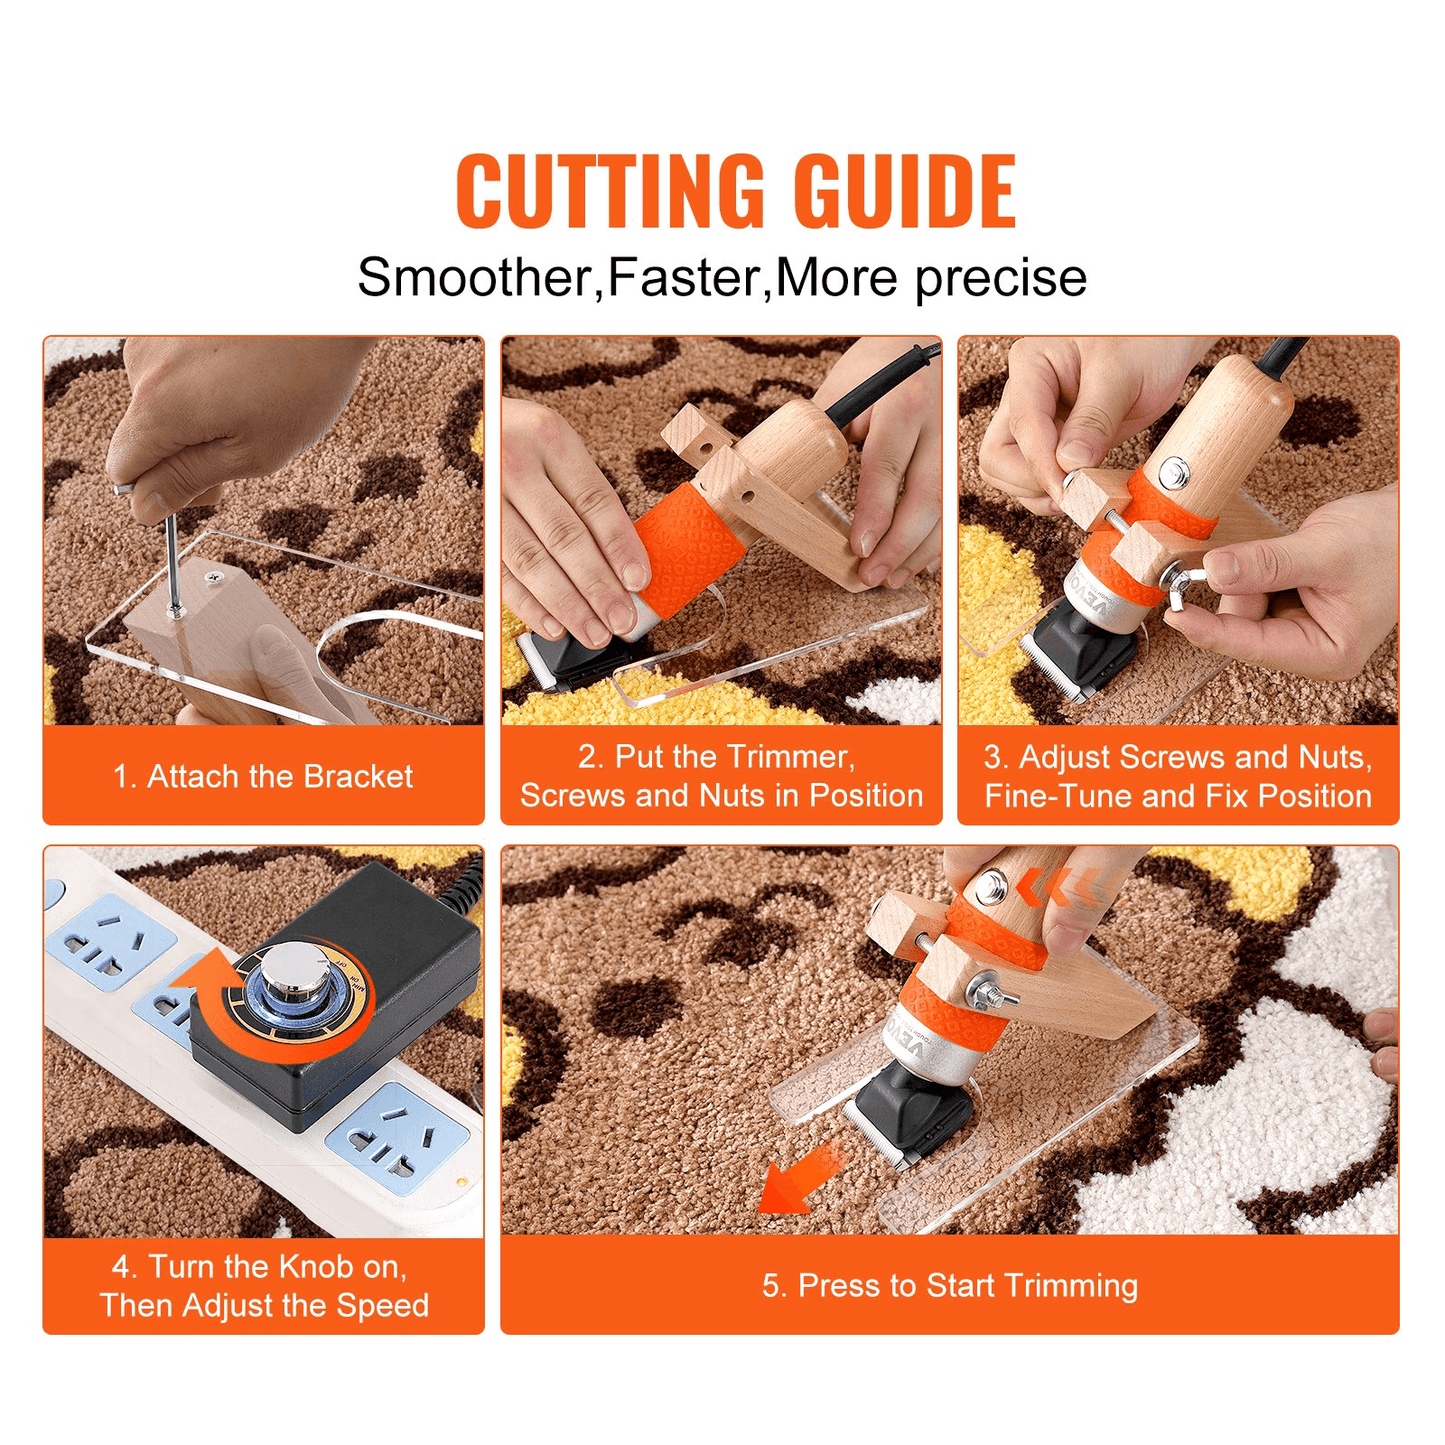 VEVOR Carpet Trimmer with Shearing Guide, 200W Electric Speed Adjustable Rug Carver, Tufting Shears with 2 Blades, Wooden Handle Carpet Carving Clippers for Handmade Rug Cleaning and Tufted Rug - Loomini